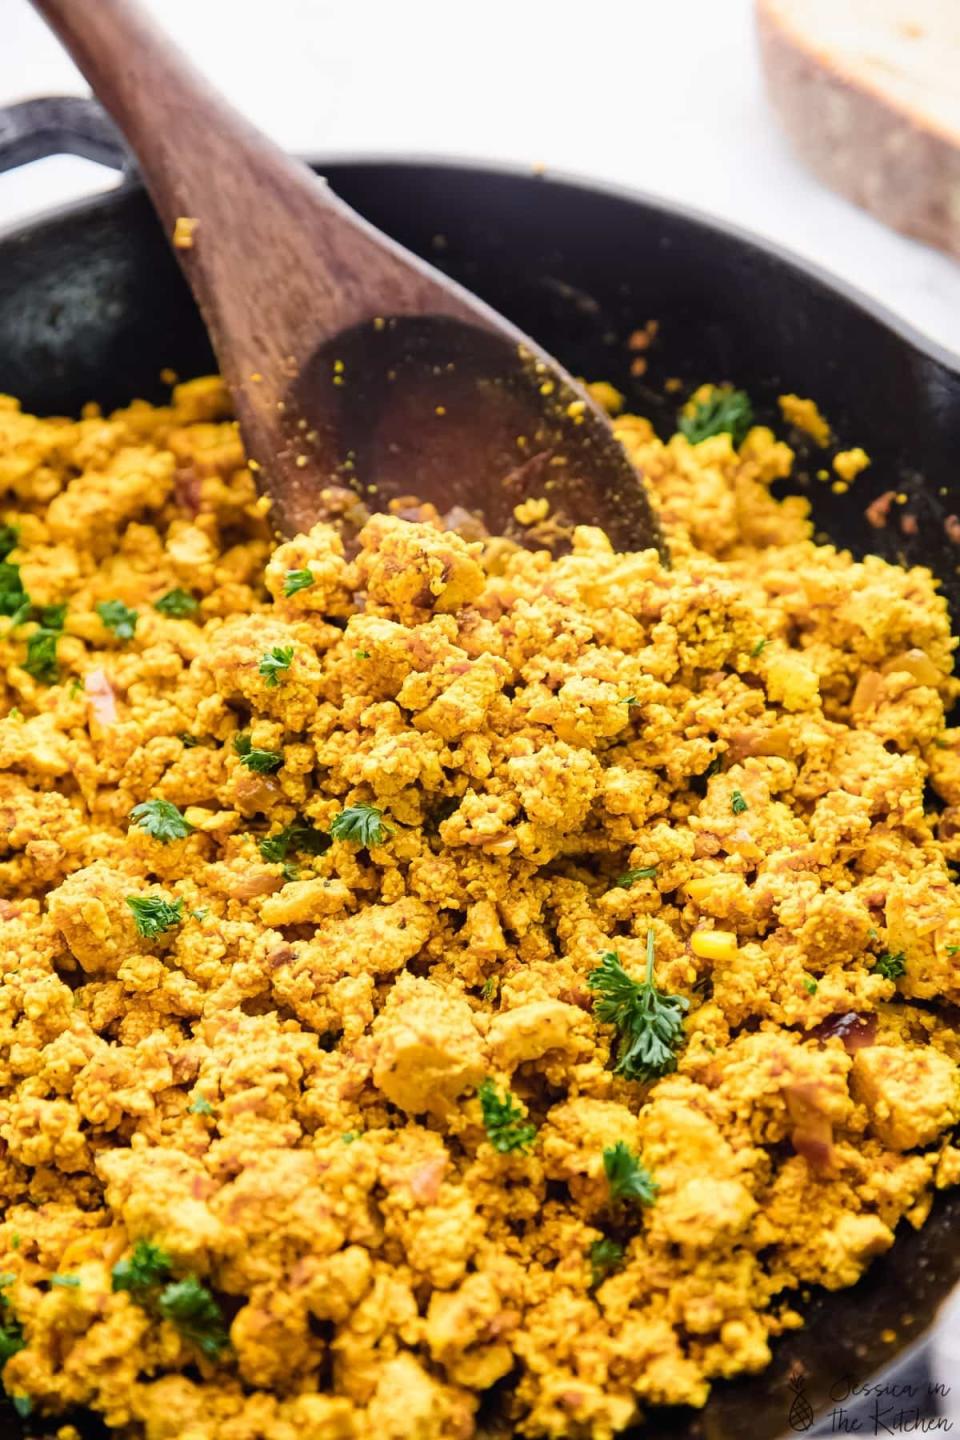 A large skillet filled with a tofu scramble that resembles scrambled eggs in texture.